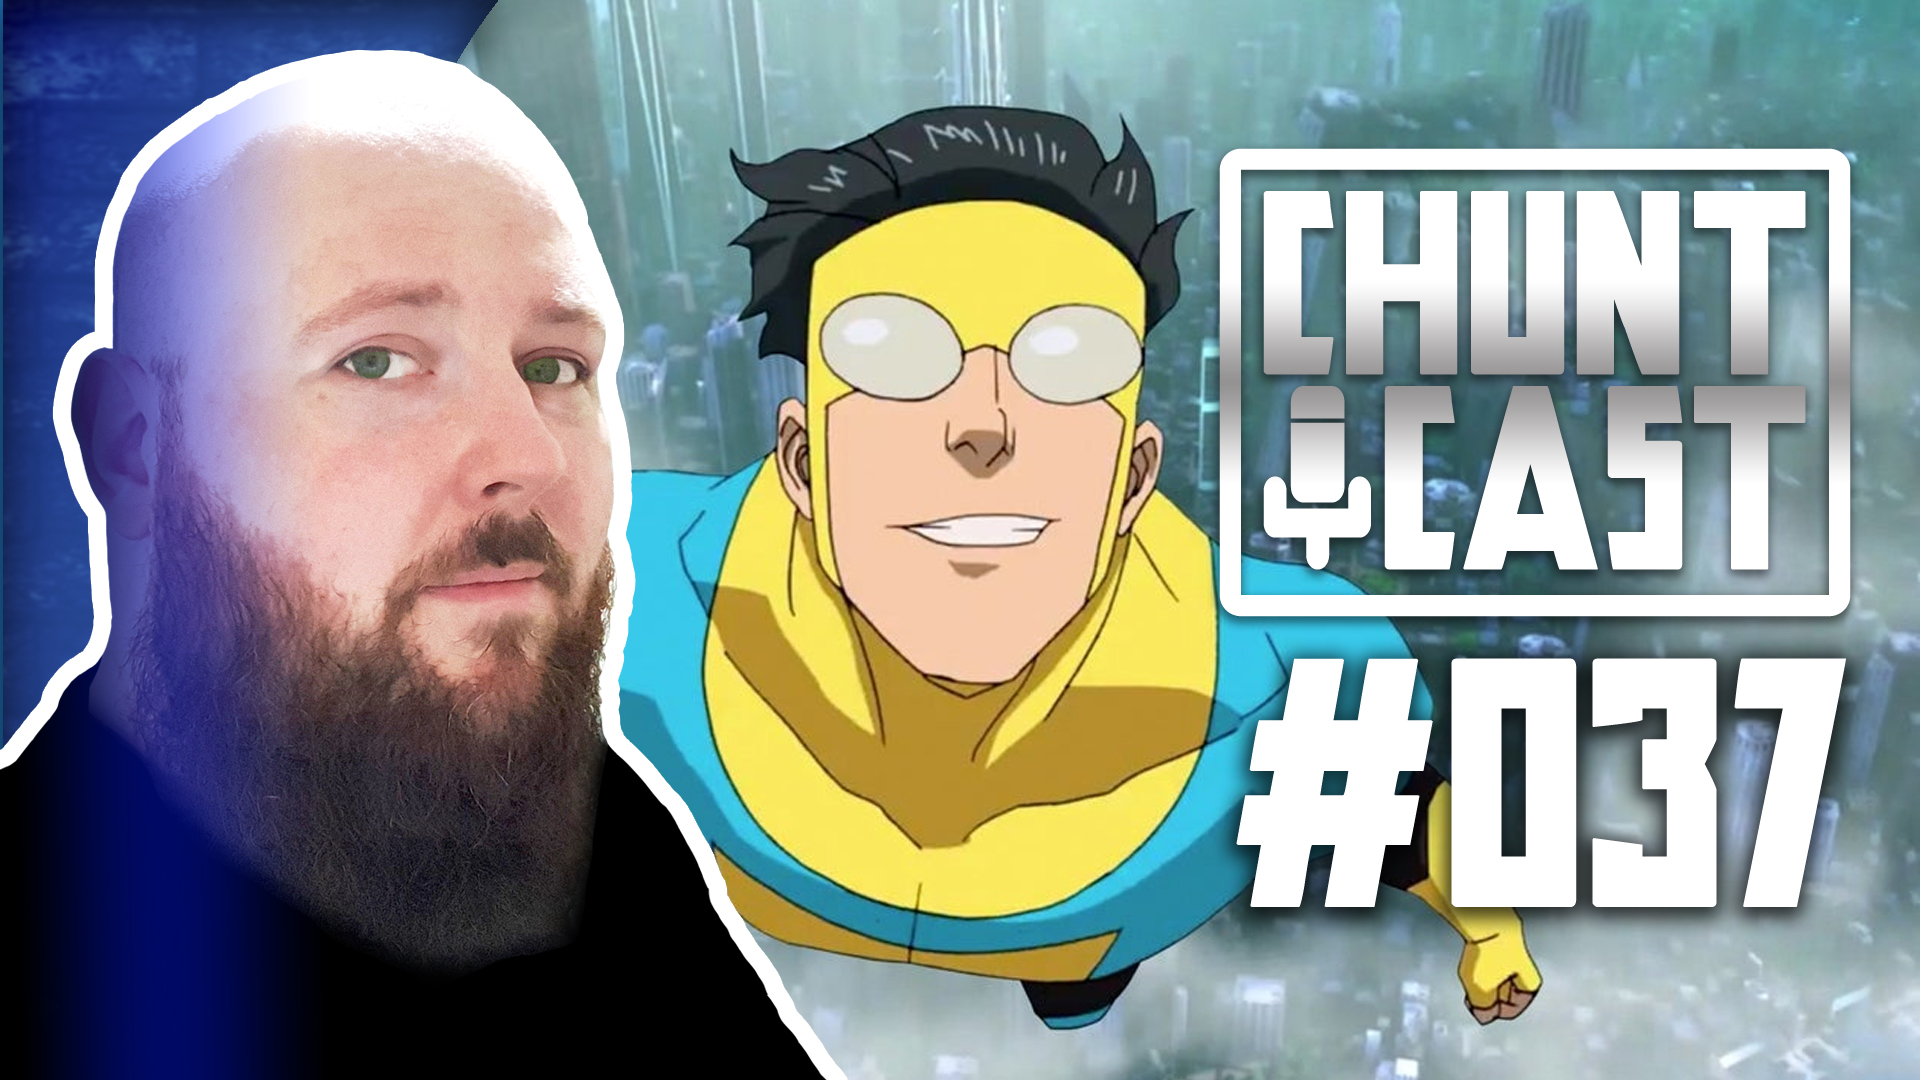 INVINCIBLE REVIEW / NetherRealm Studios Marvel Game / More Justice League mess – CHUNTCAST 37